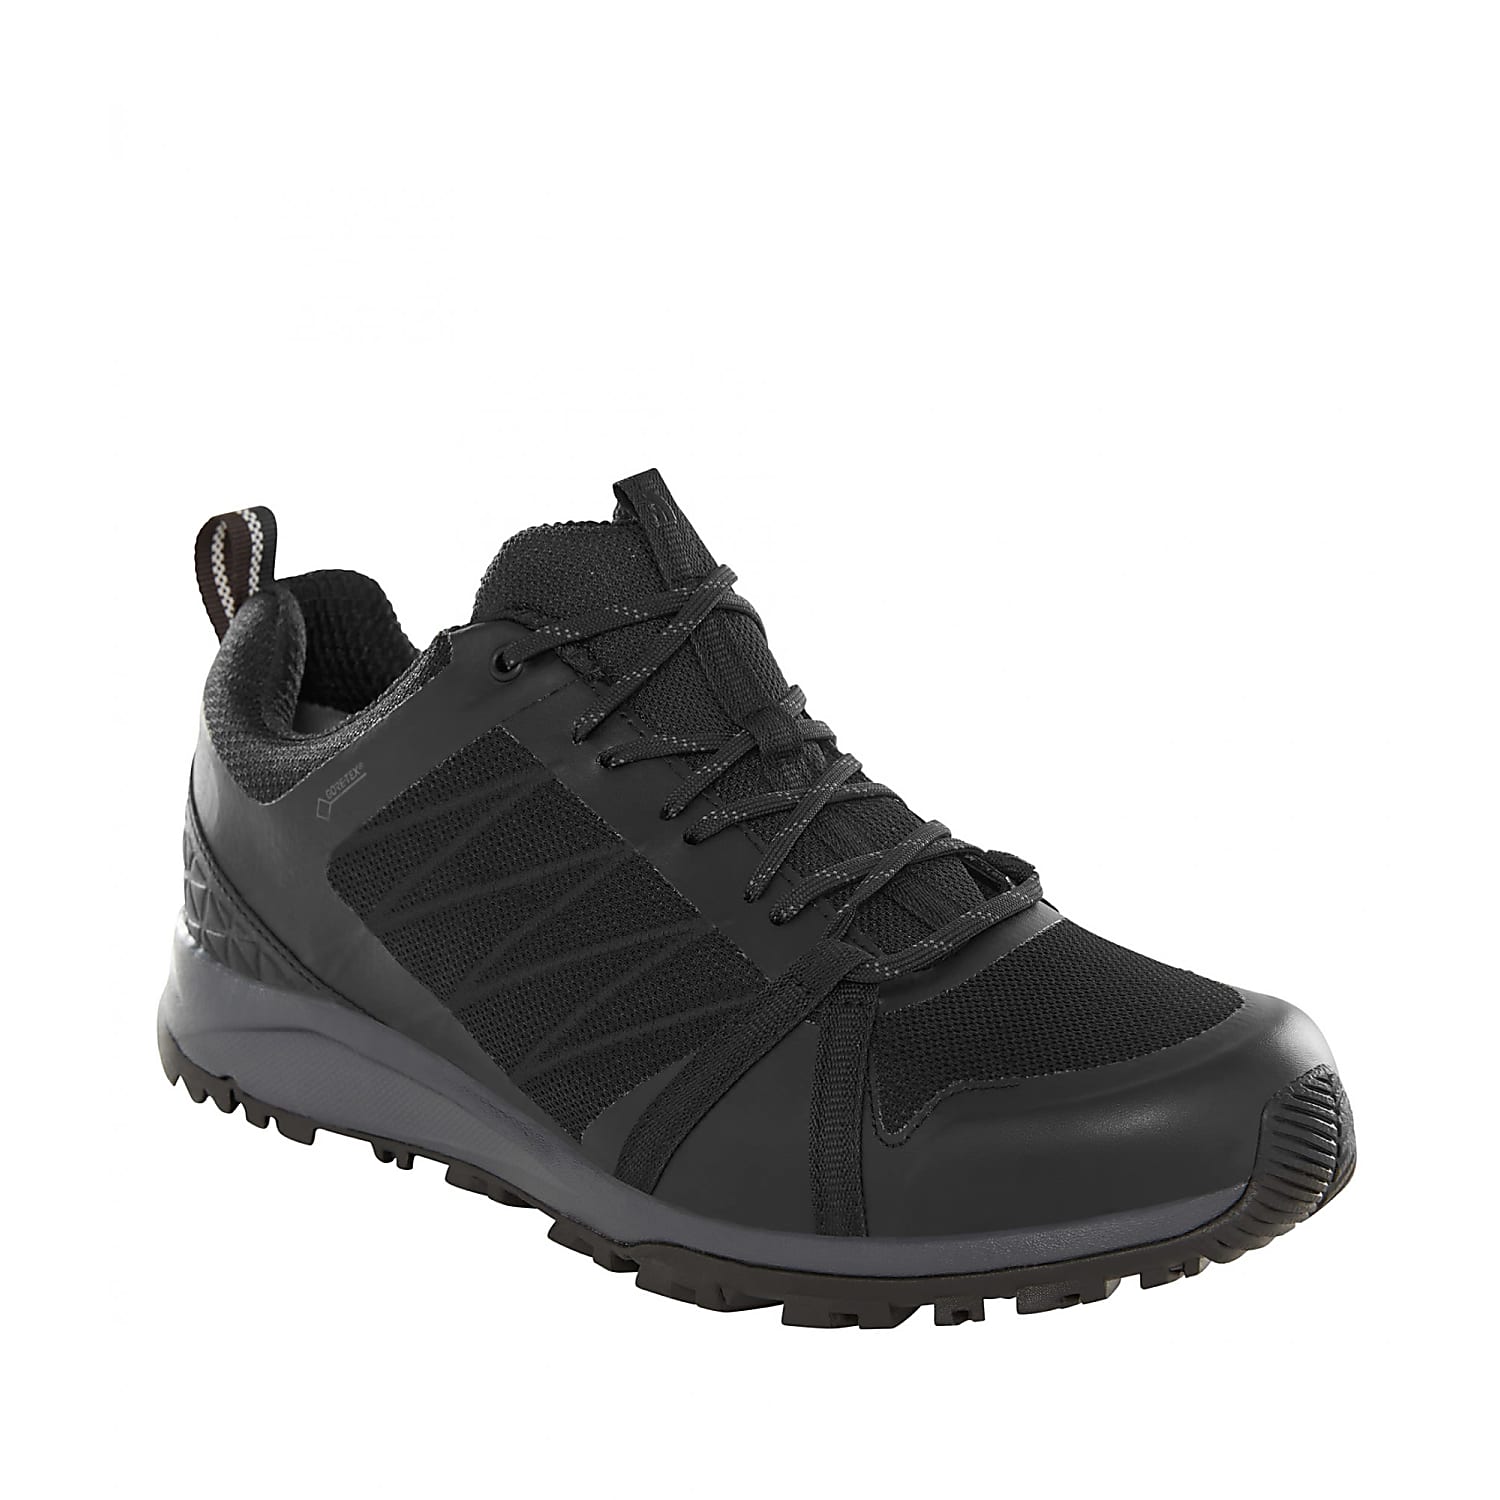 the north face men's litewave fastpack ii mid waterproof hiking boots